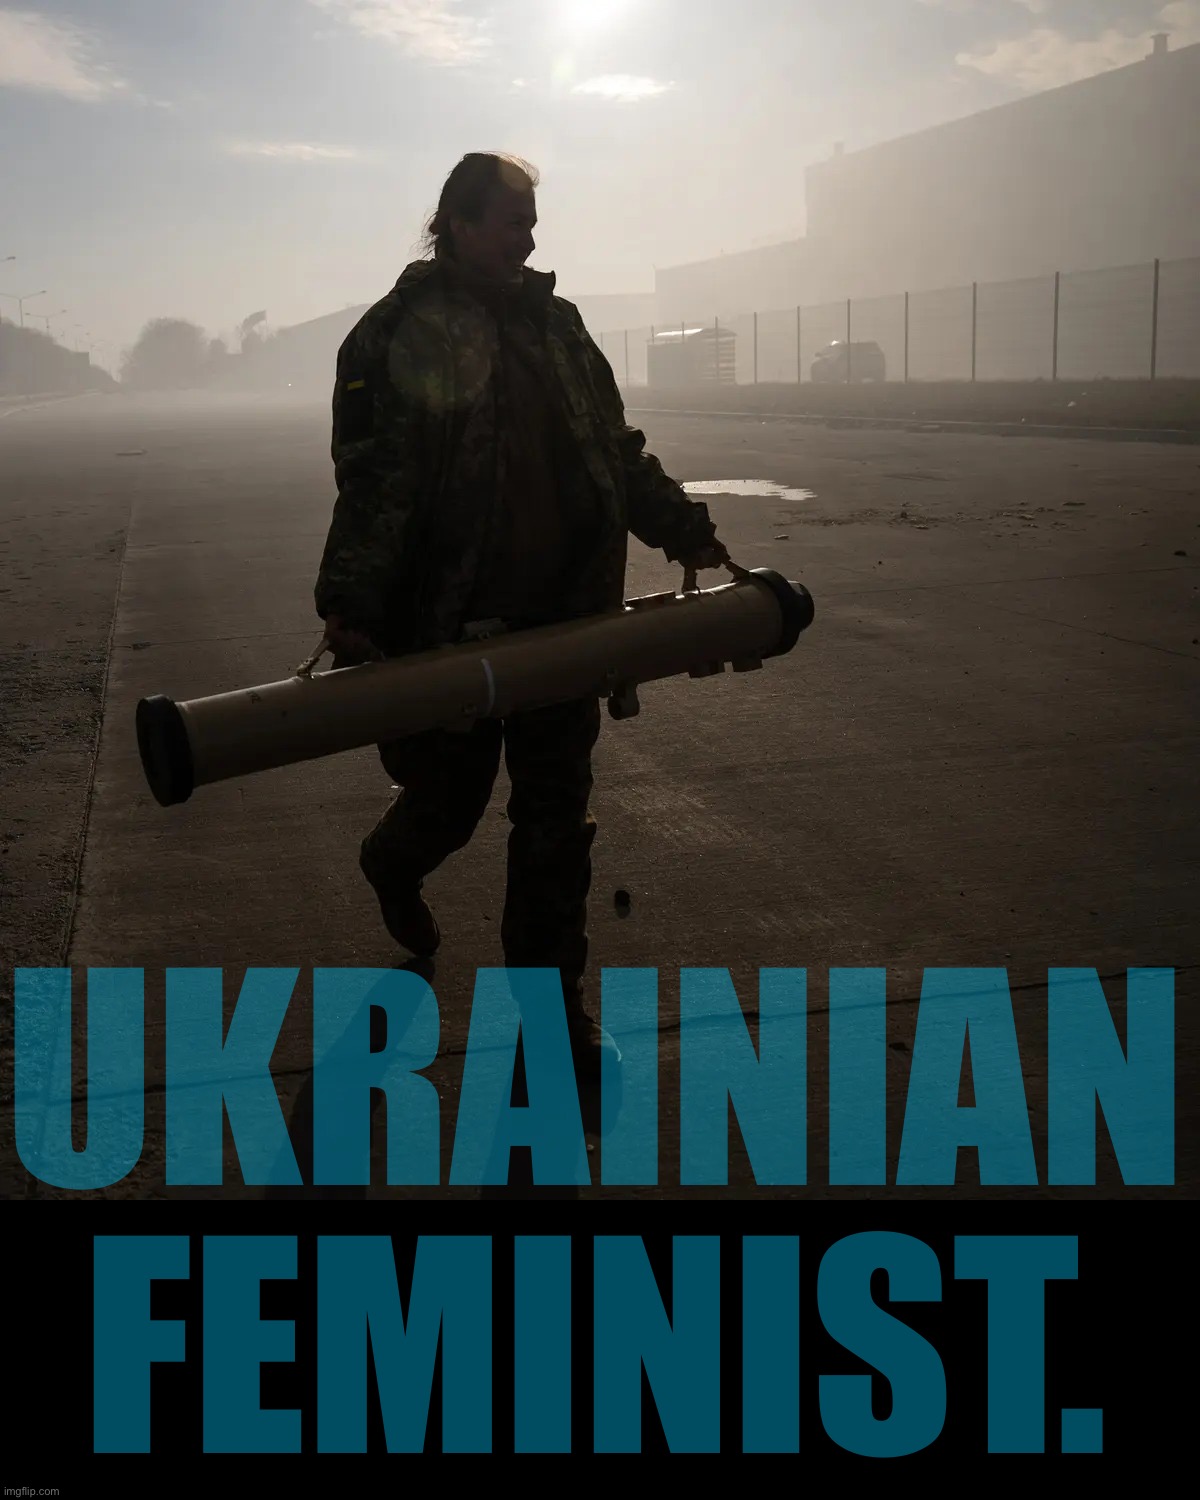 Lt. Tetiana Chornoval, commander of an anti-tank missile unit, on the outskirts of Kiev; early-March 2022. | UKRAINIAN FEMINIST. | image tagged in ukrainian soldier,ukraine,ukrainian lives matter,ukrainian,soldier,feminist | made w/ Imgflip meme maker